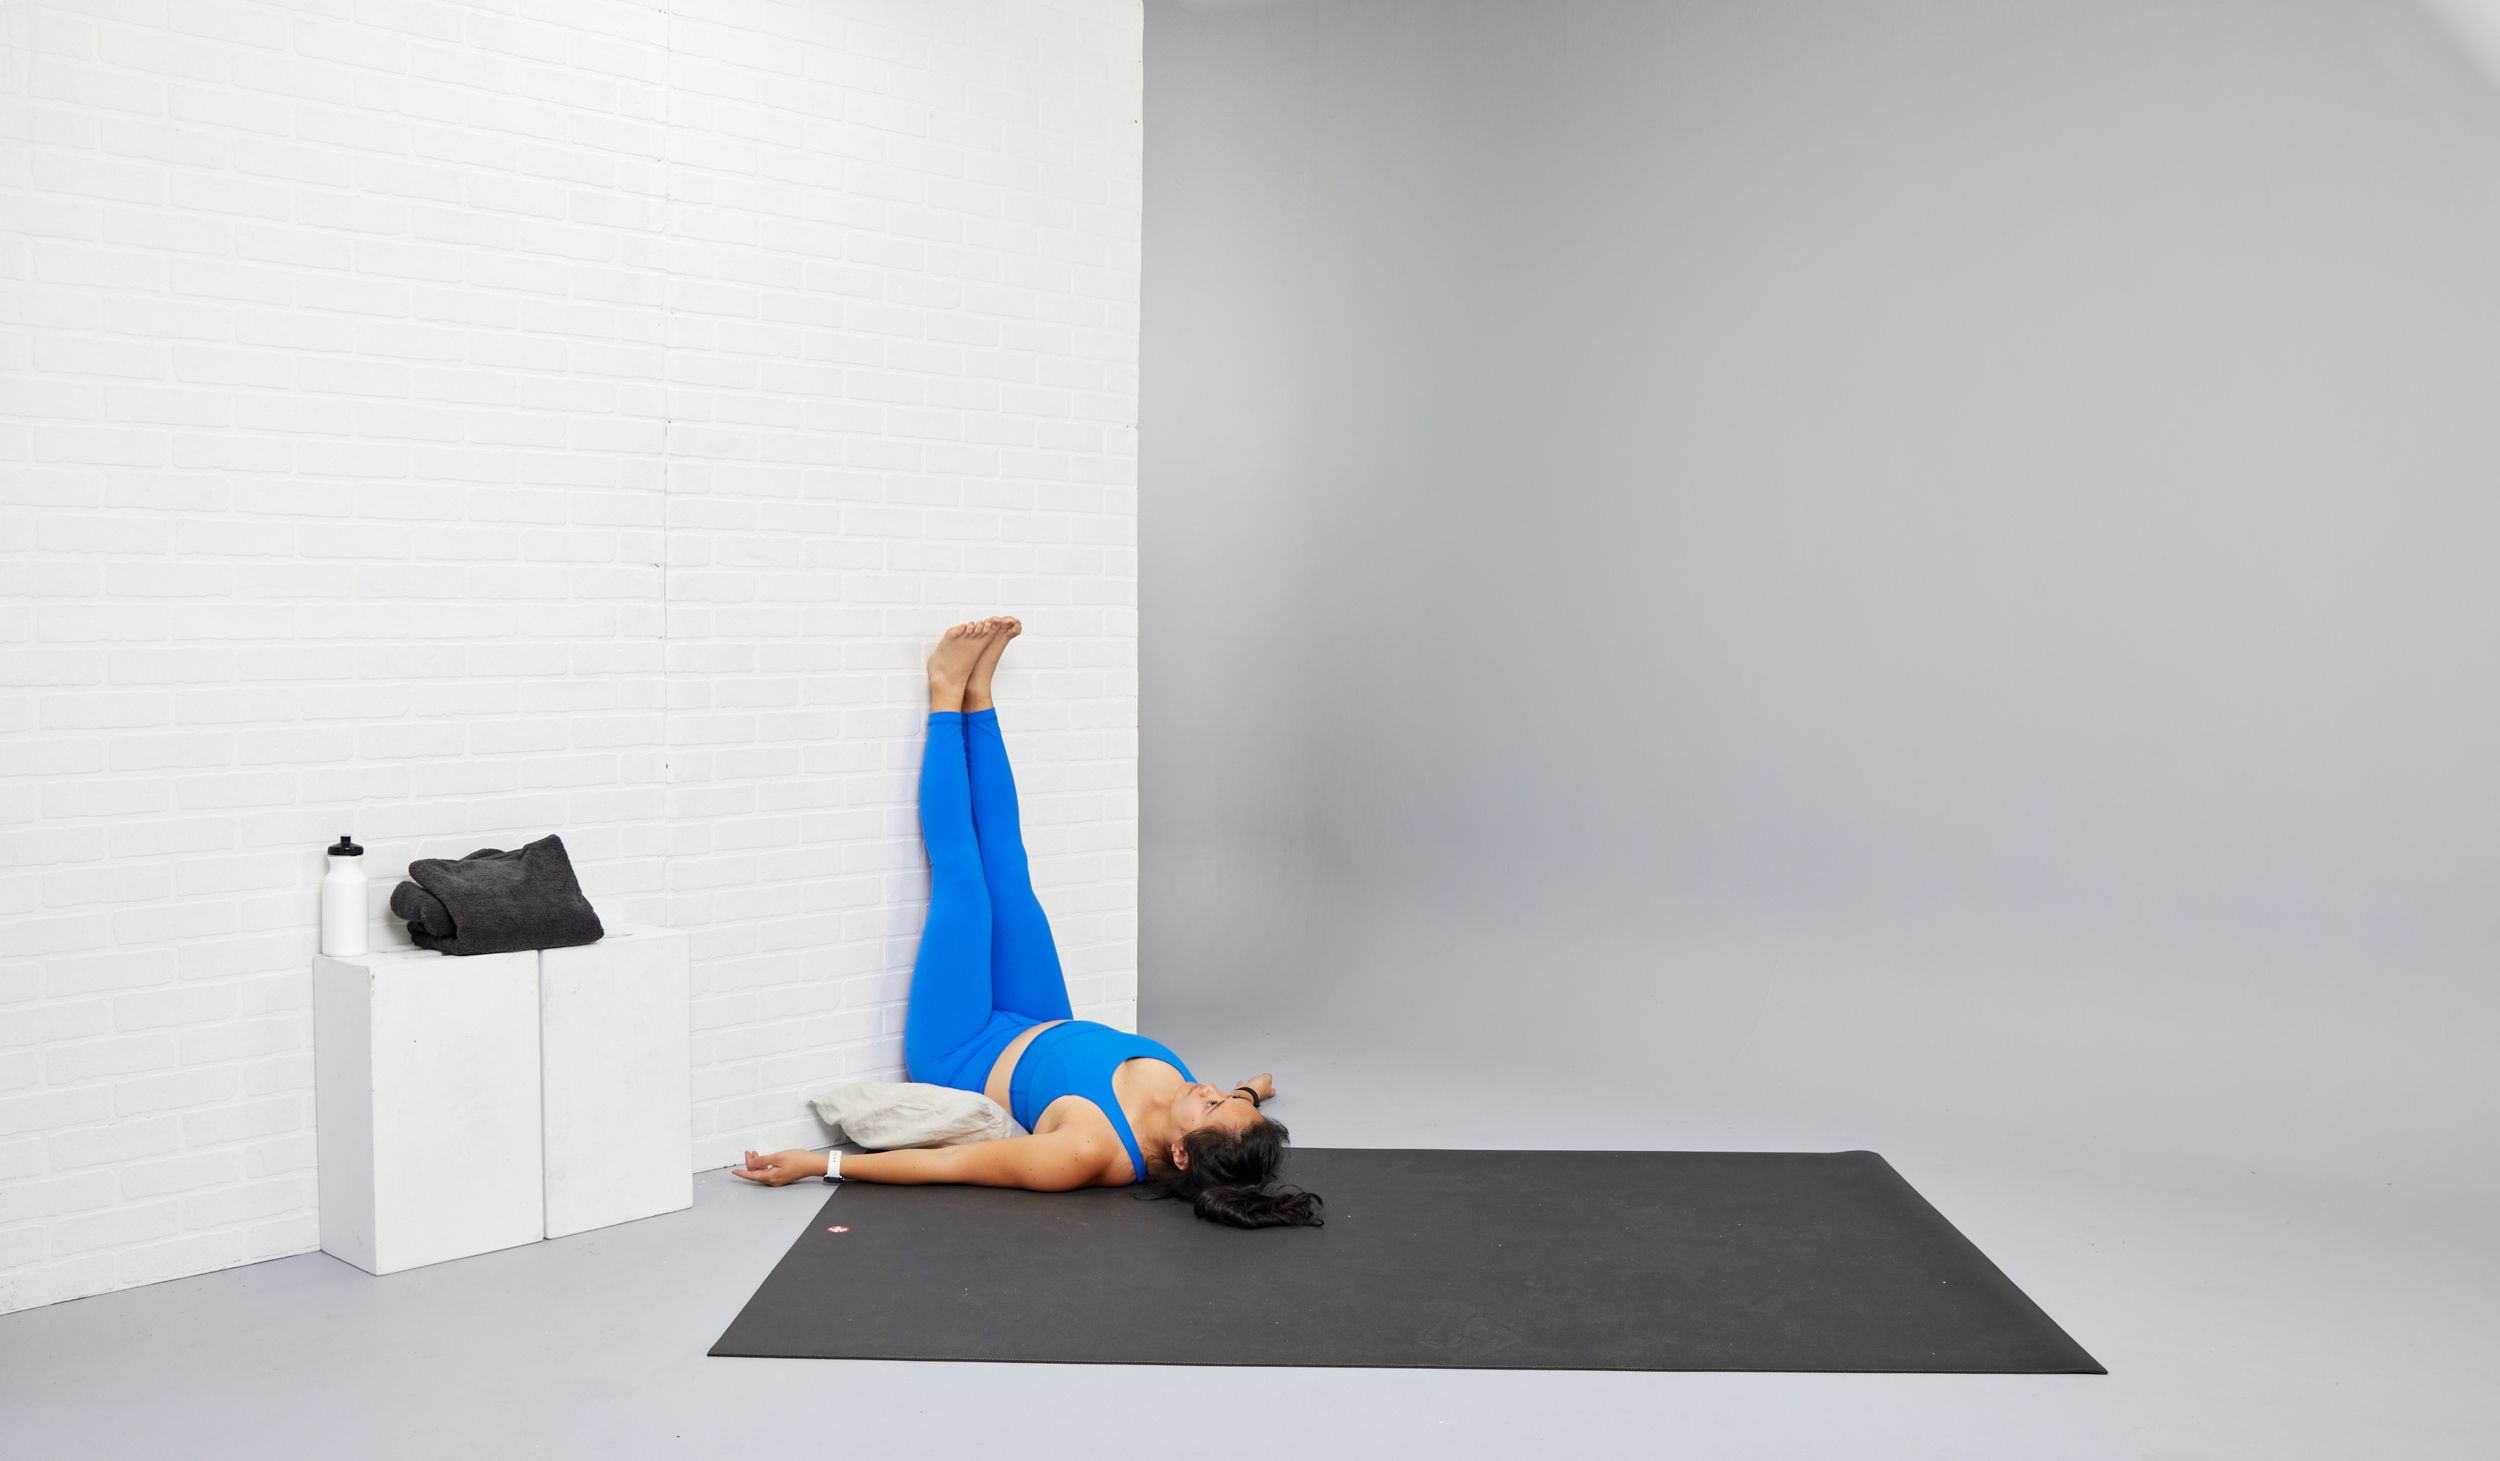 Legs Up The Wall Yoga Pose Benefits Kayaworkout Co